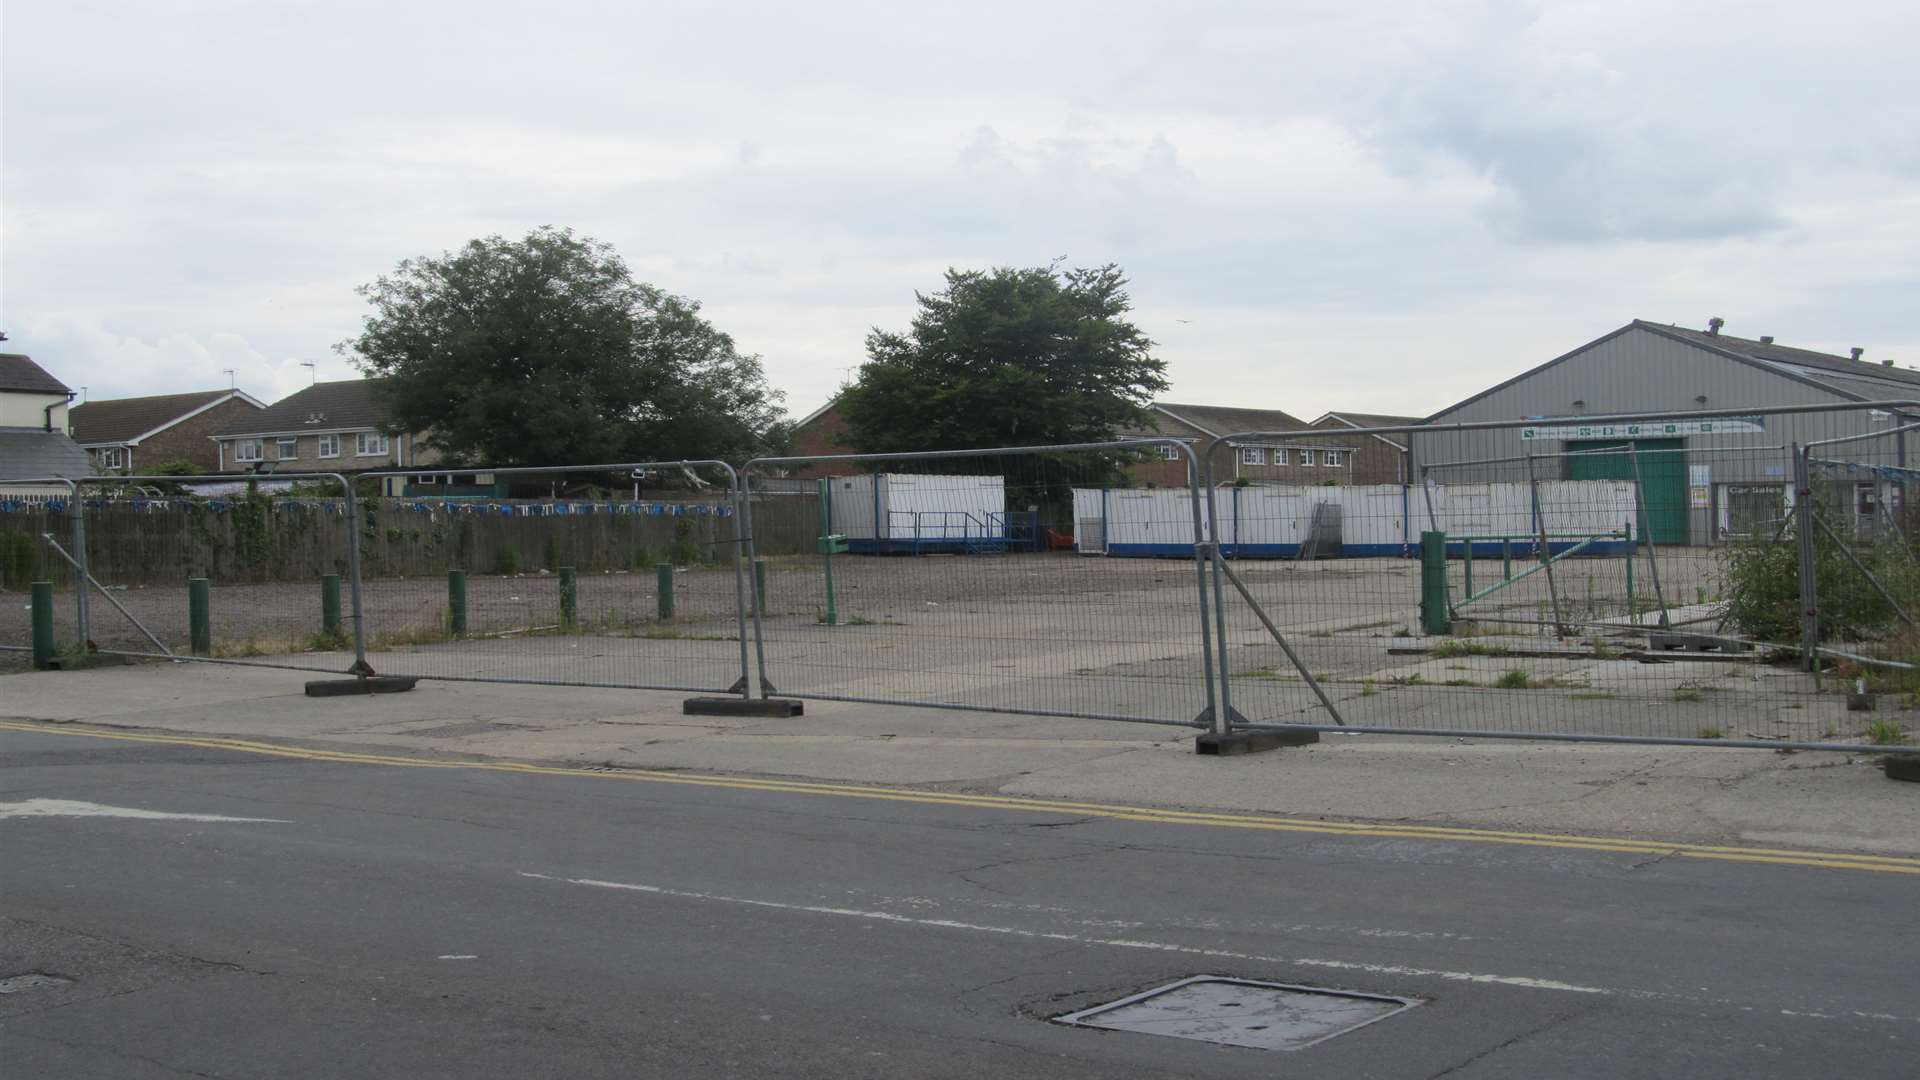 The entrance to the site at Albert Road